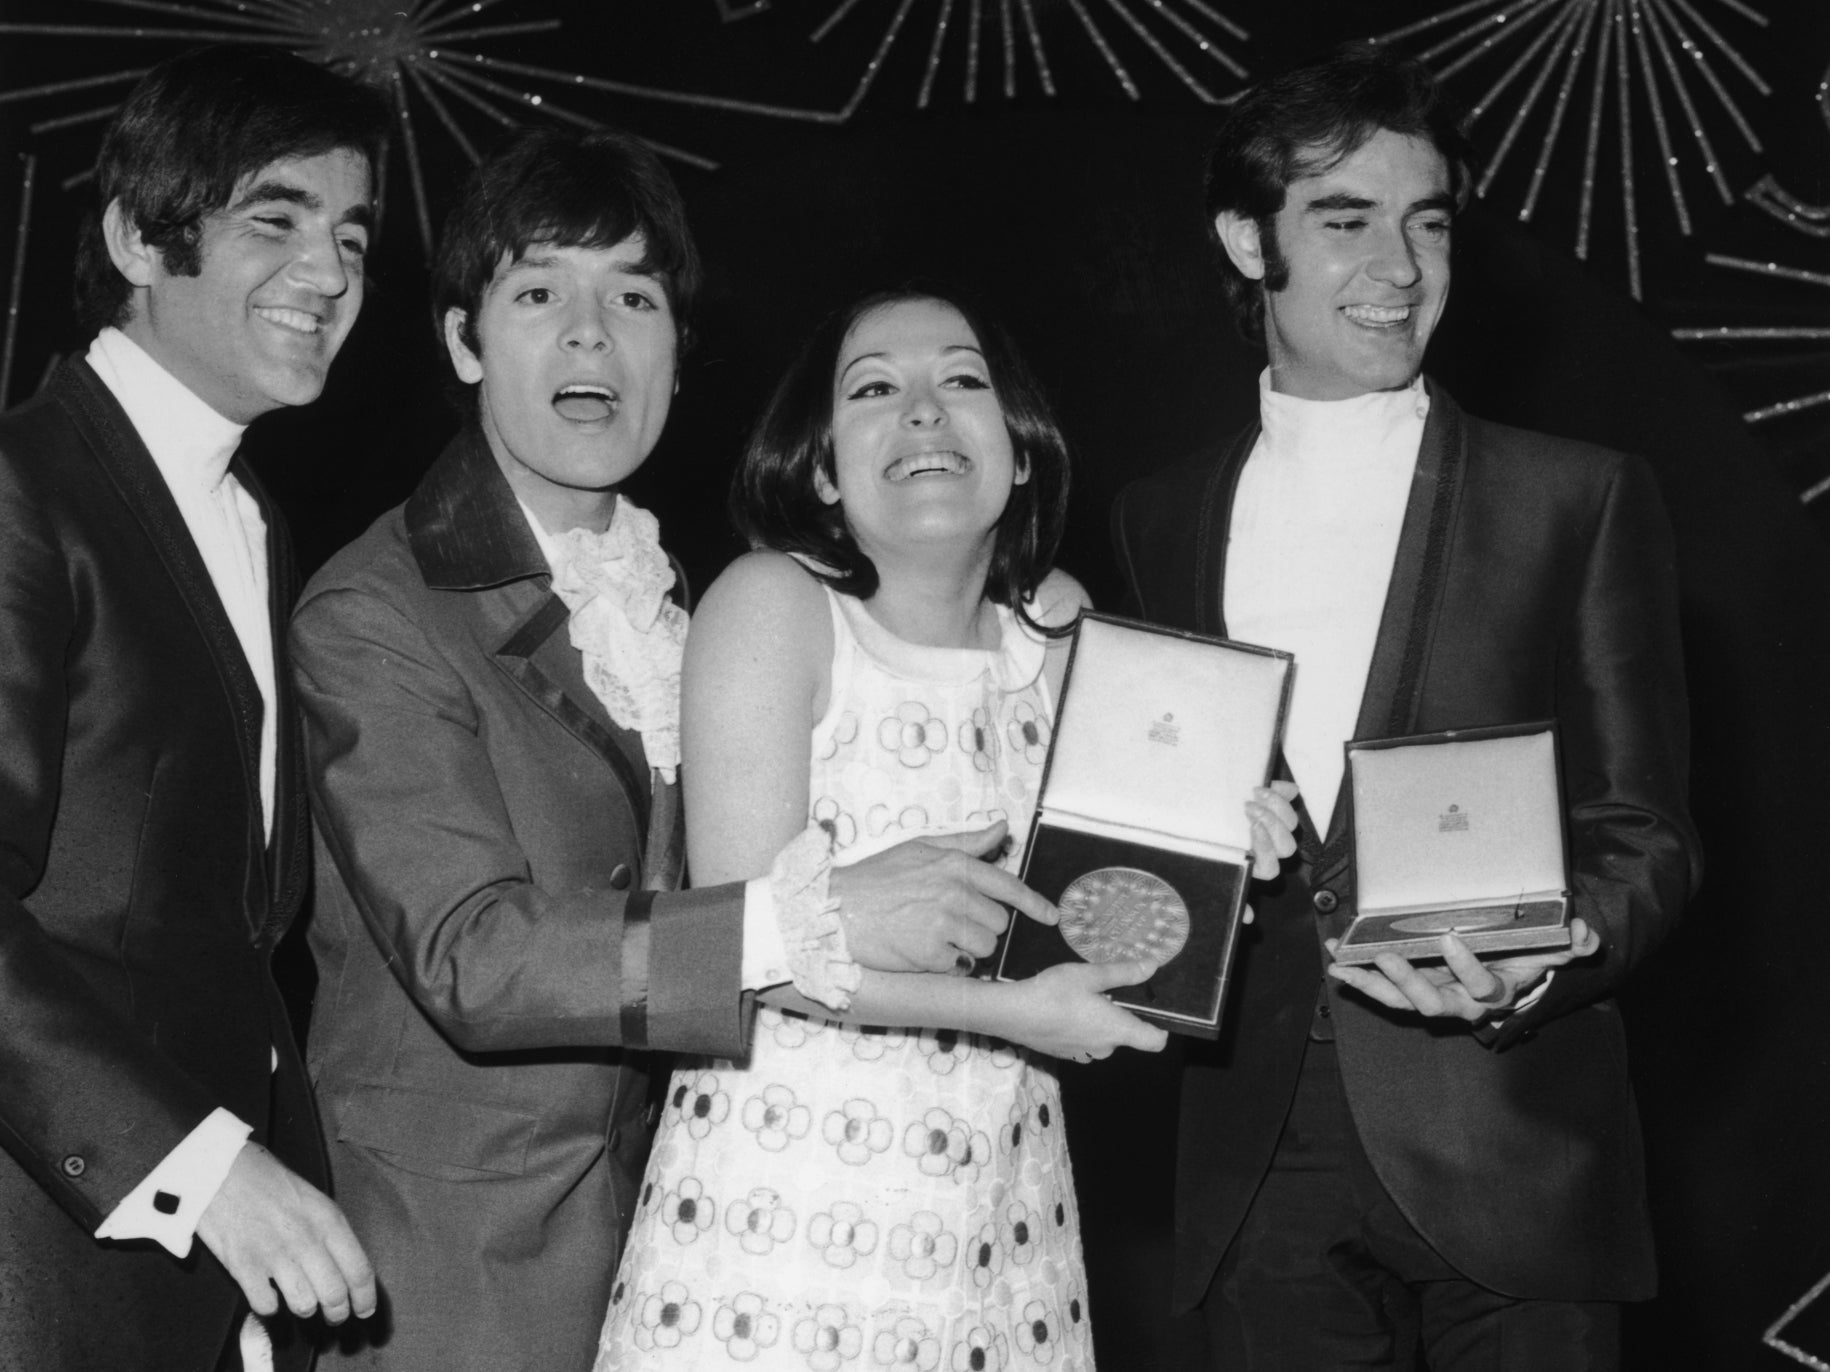 Maissel?is congratulated by runner-up Cliff Richard in 1968